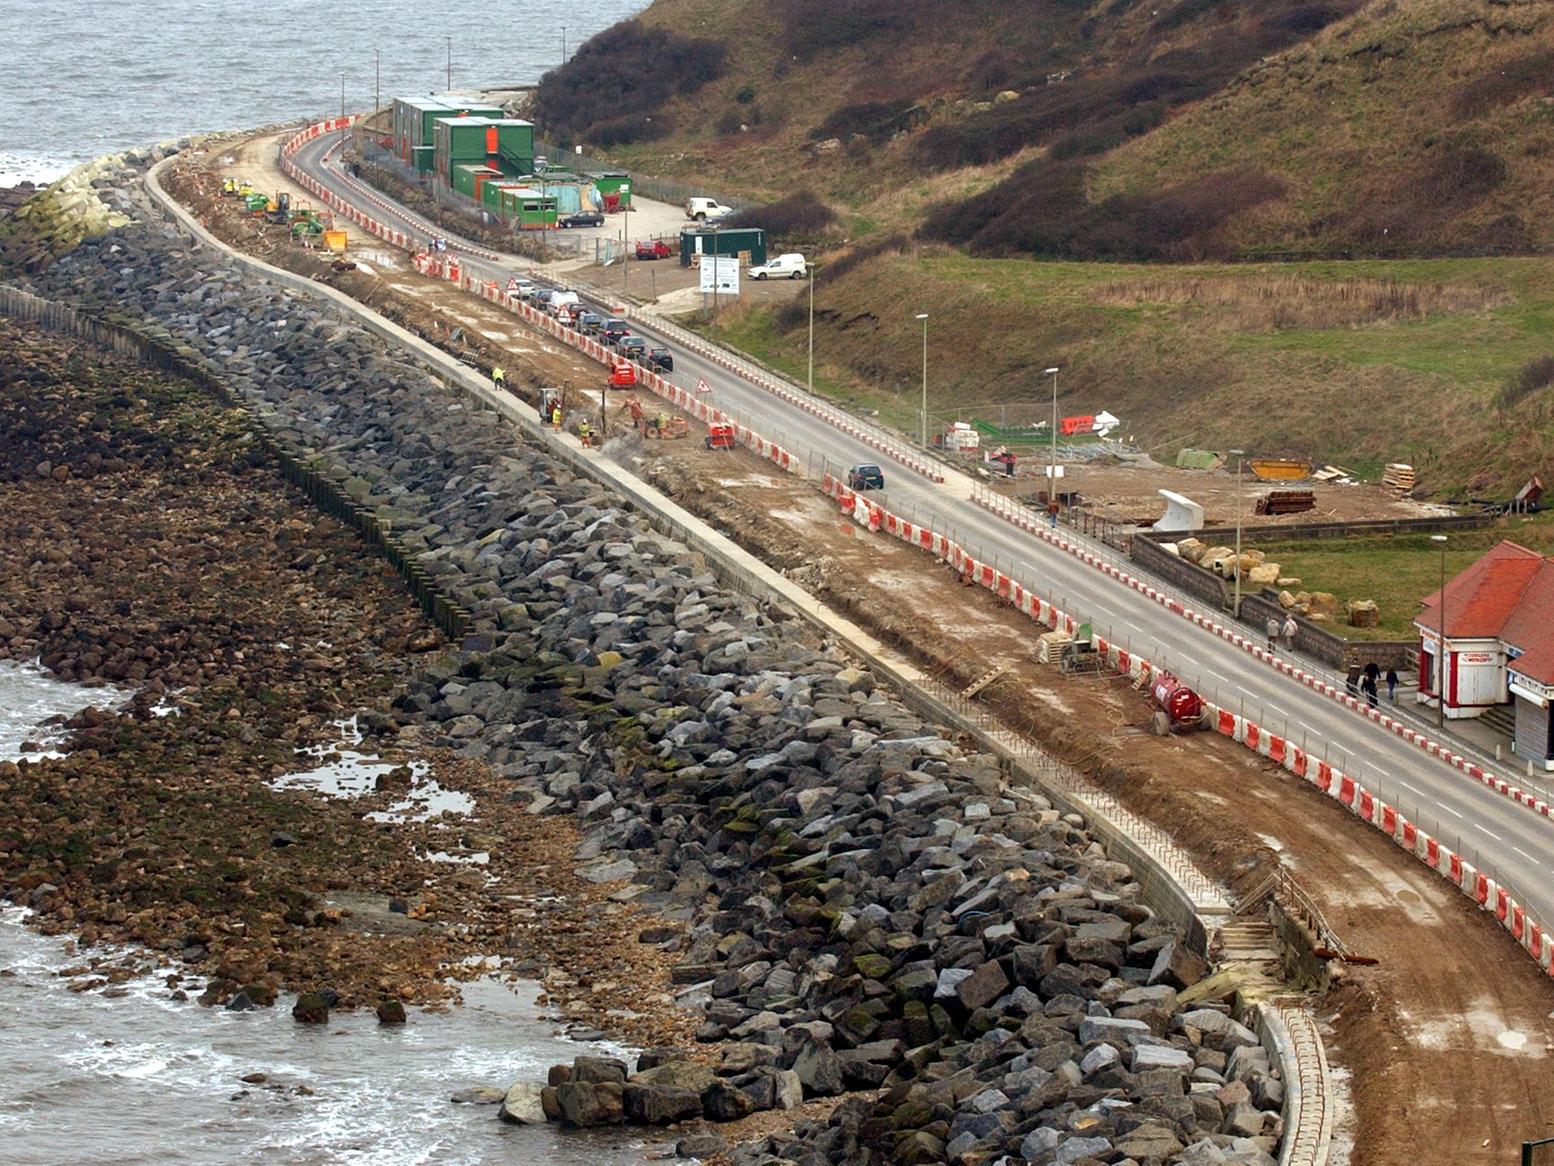 The extensive sea defence project along the Marine Drive took place in the early 2000s and have dramatically changed the appearance of the North Bay, becoming an established feature of the coastline.